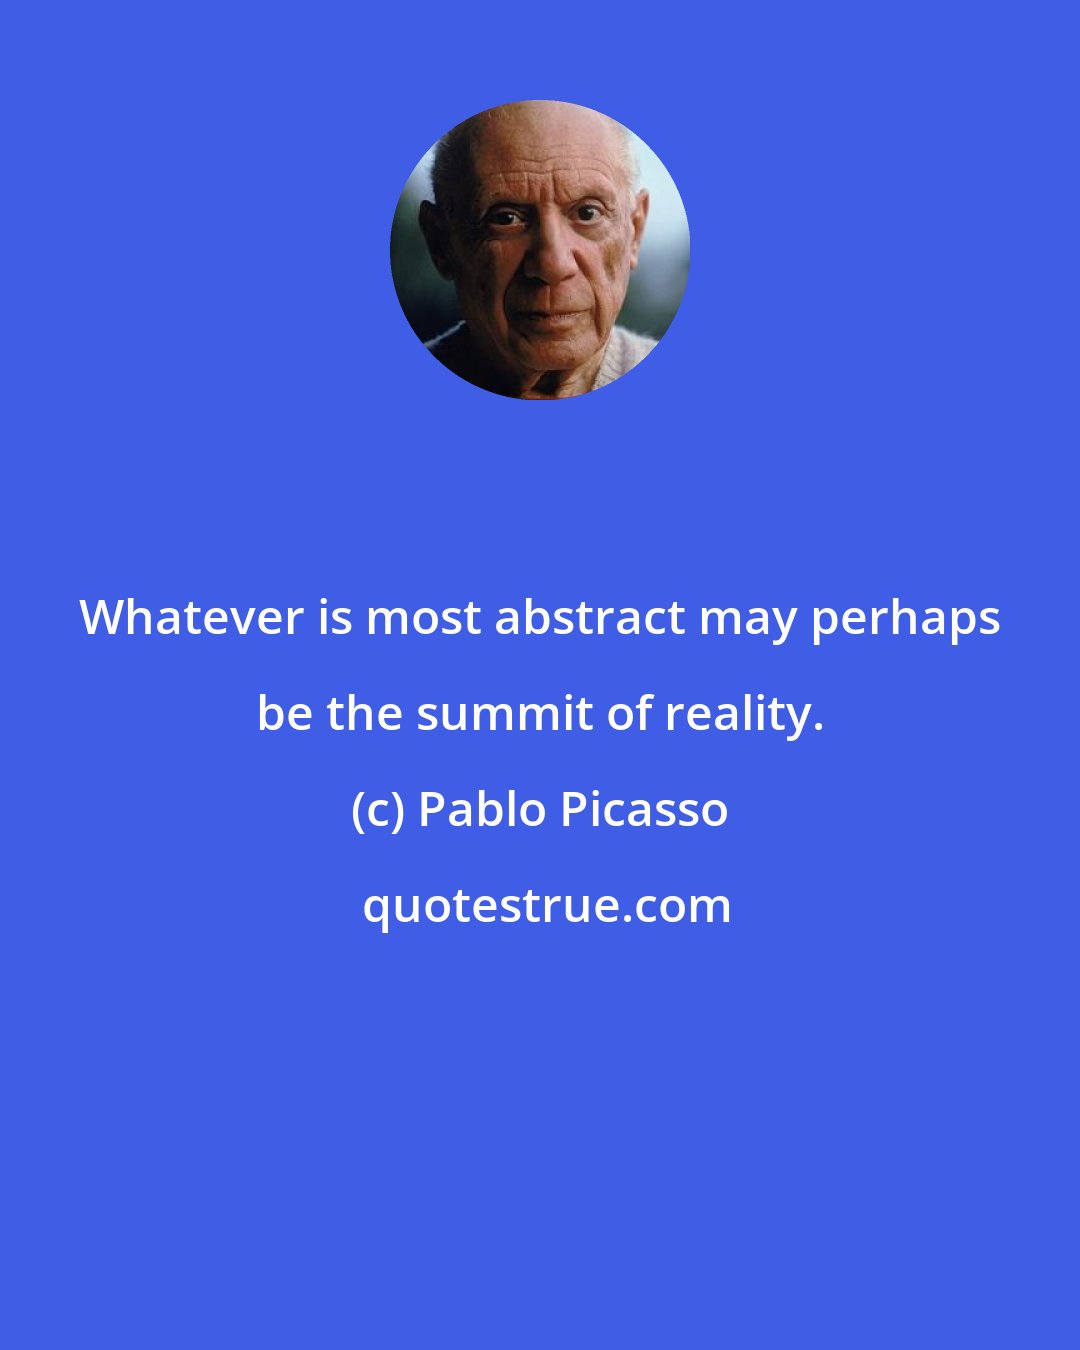 Pablo Picasso: Whatever is most abstract may perhaps be the summit of reality.